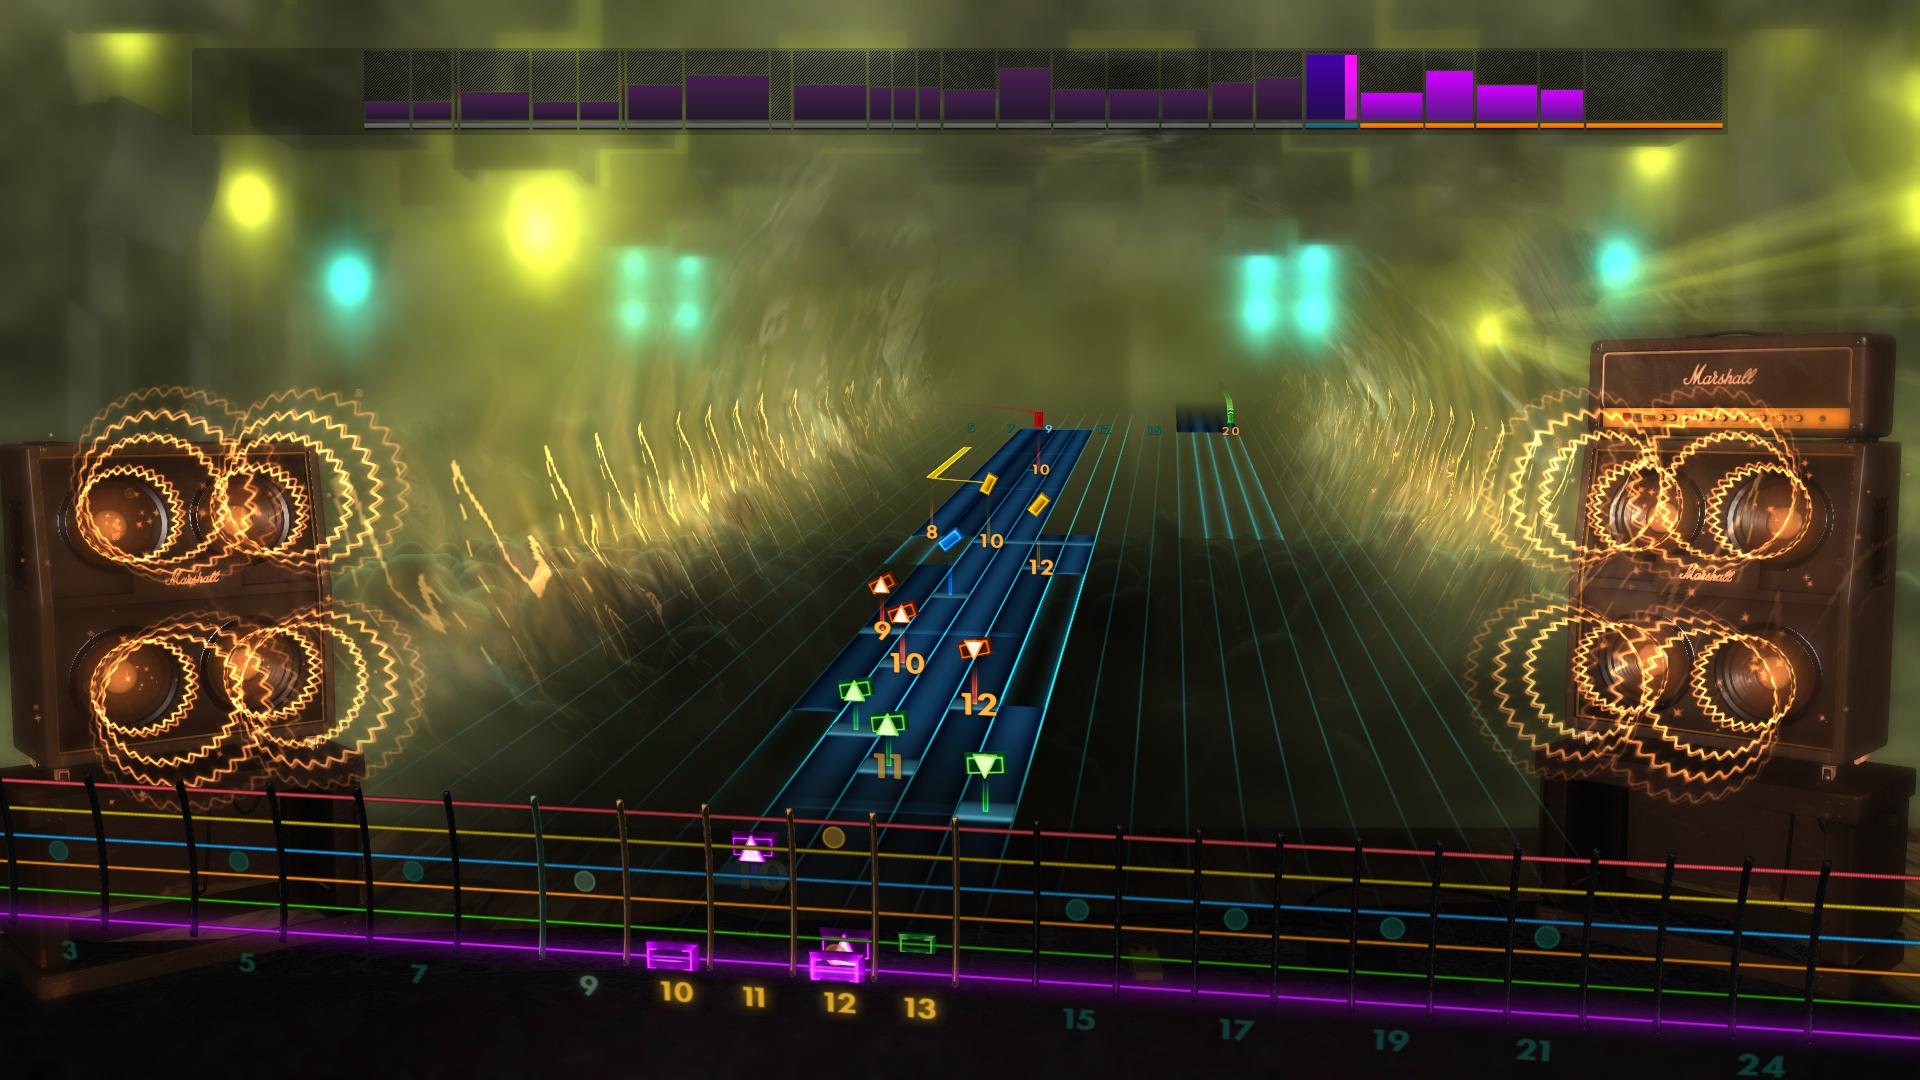 Rocksmith® 2014 Edition – Remastered – Trans-Siberian Orchestra - “O Come All Ye Faithful / O Holy Night” Featured Screenshot #1